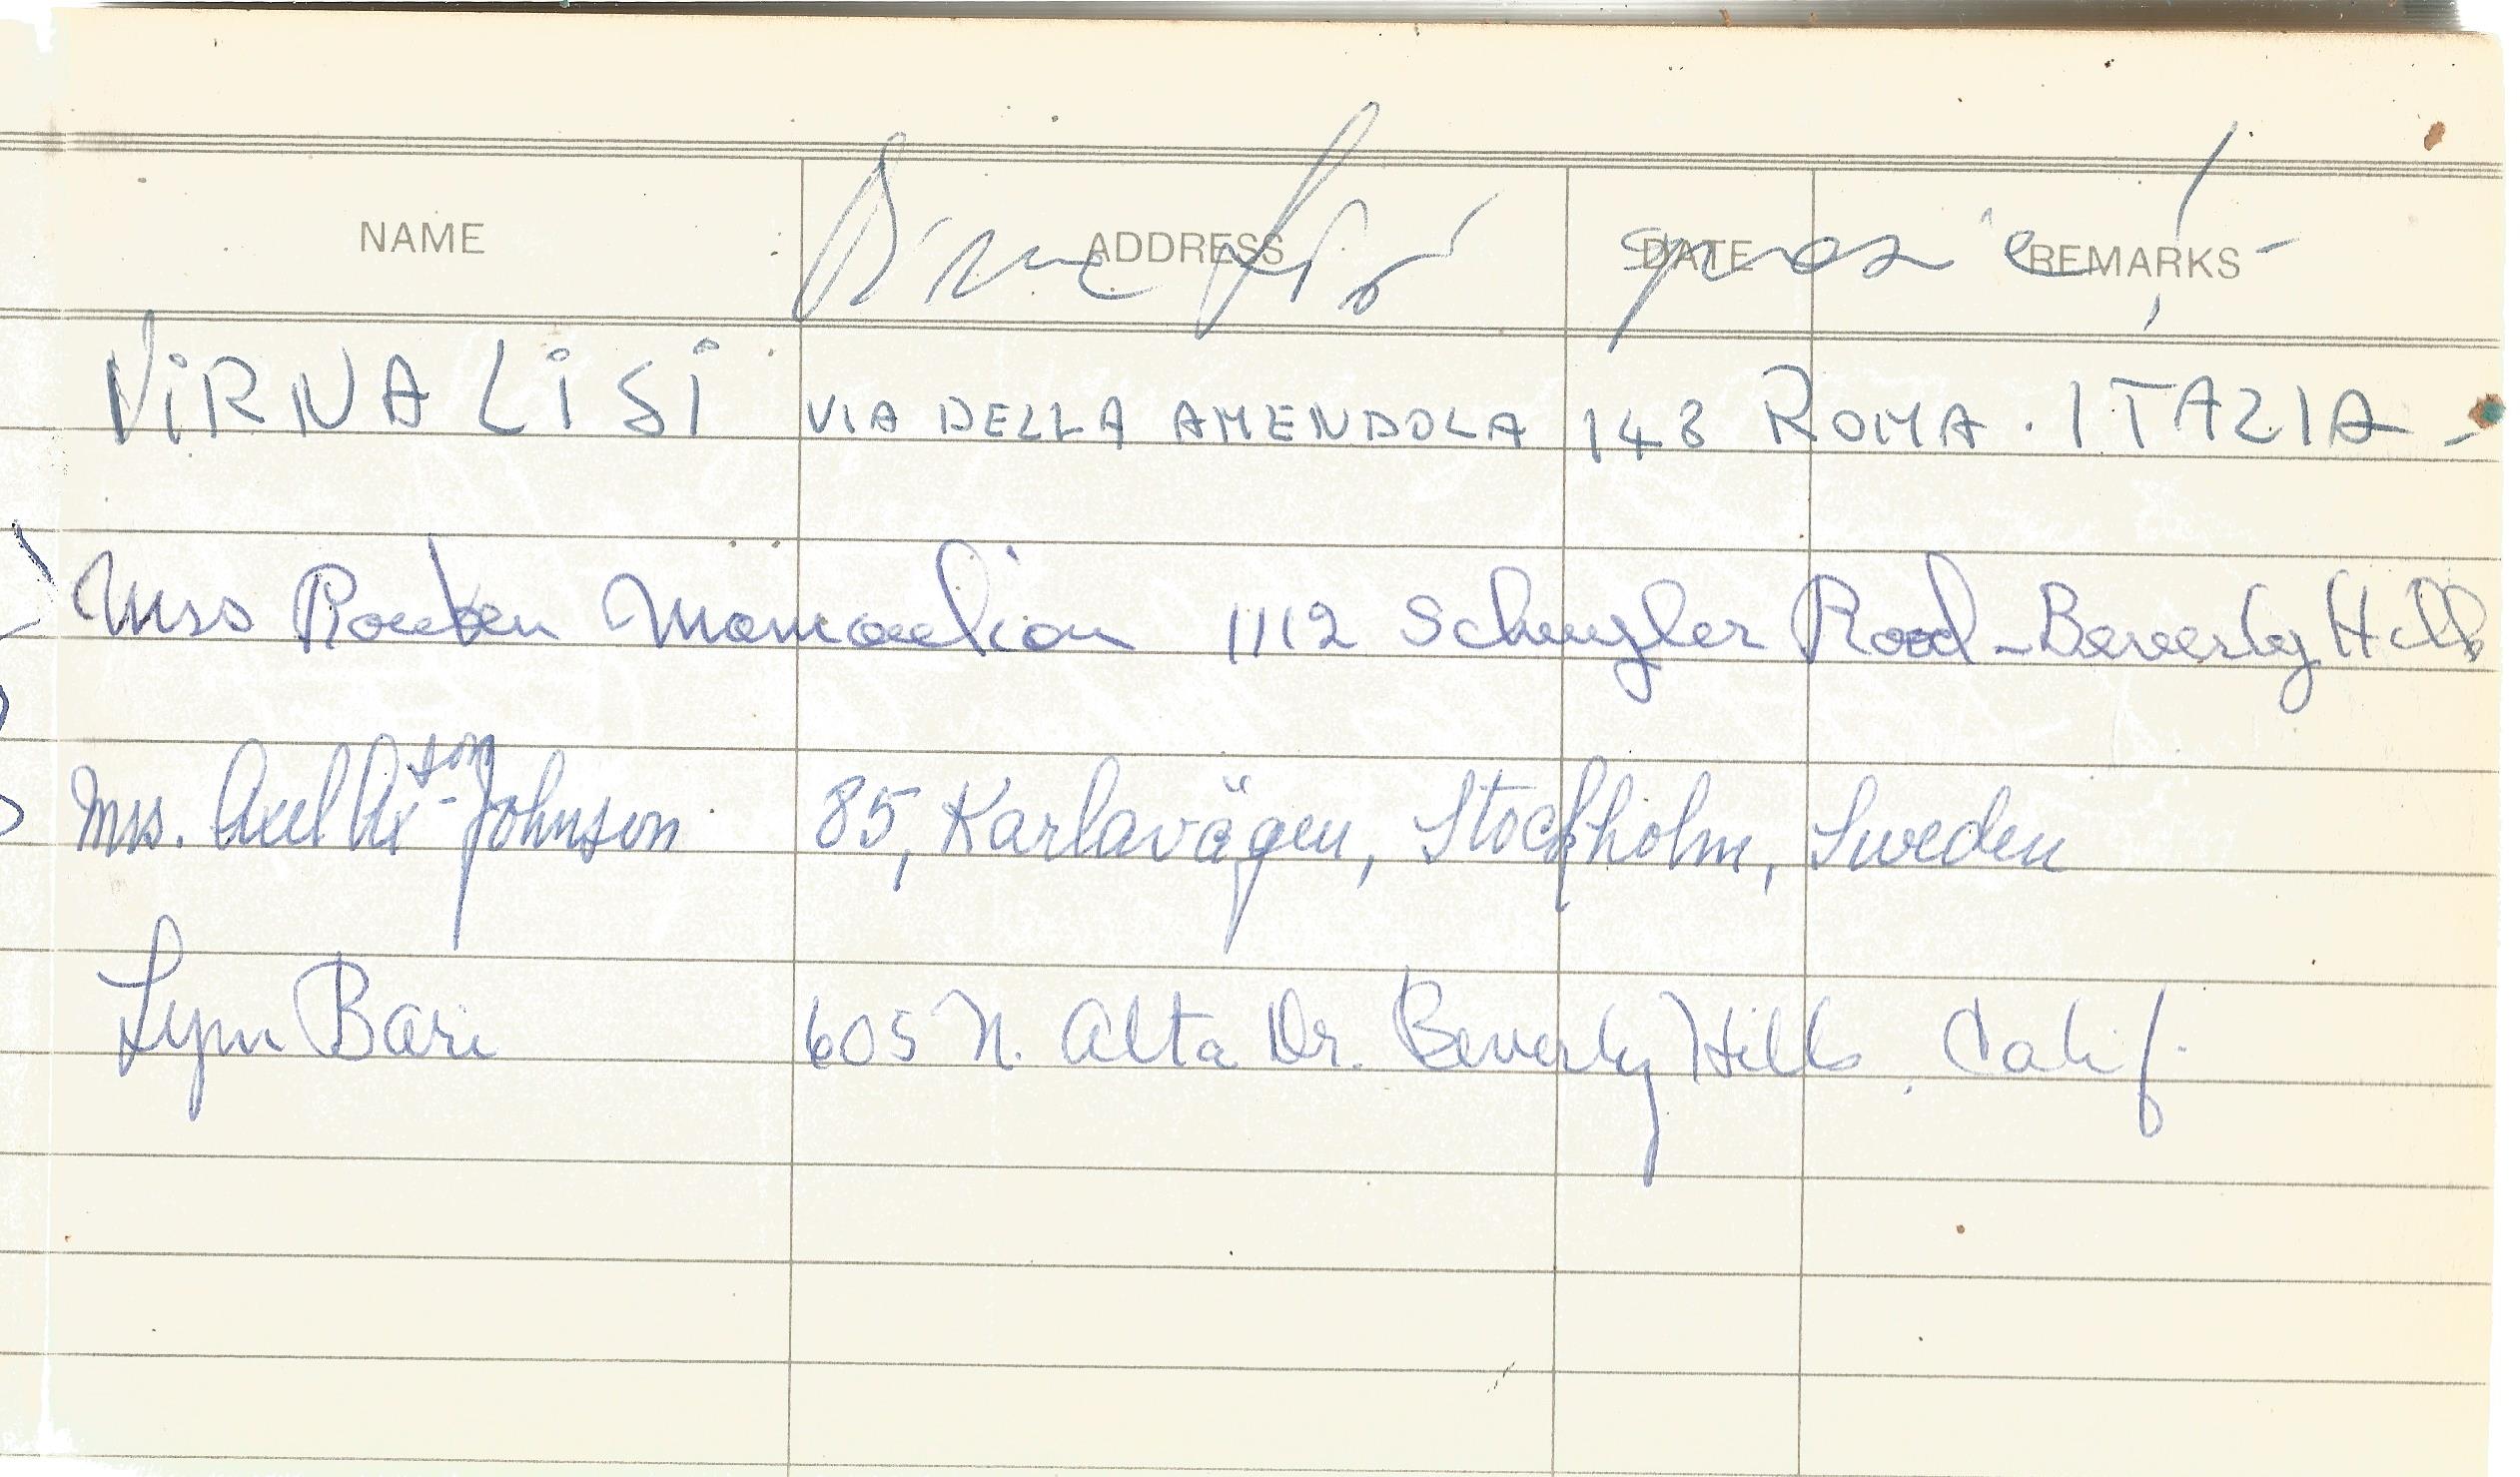 Vintage Guest Book belonging to JOHN BERNARD who was MD & ARTISTIC ADVISOR at THE HOUSE OF REVLON in - Image 10 of 10